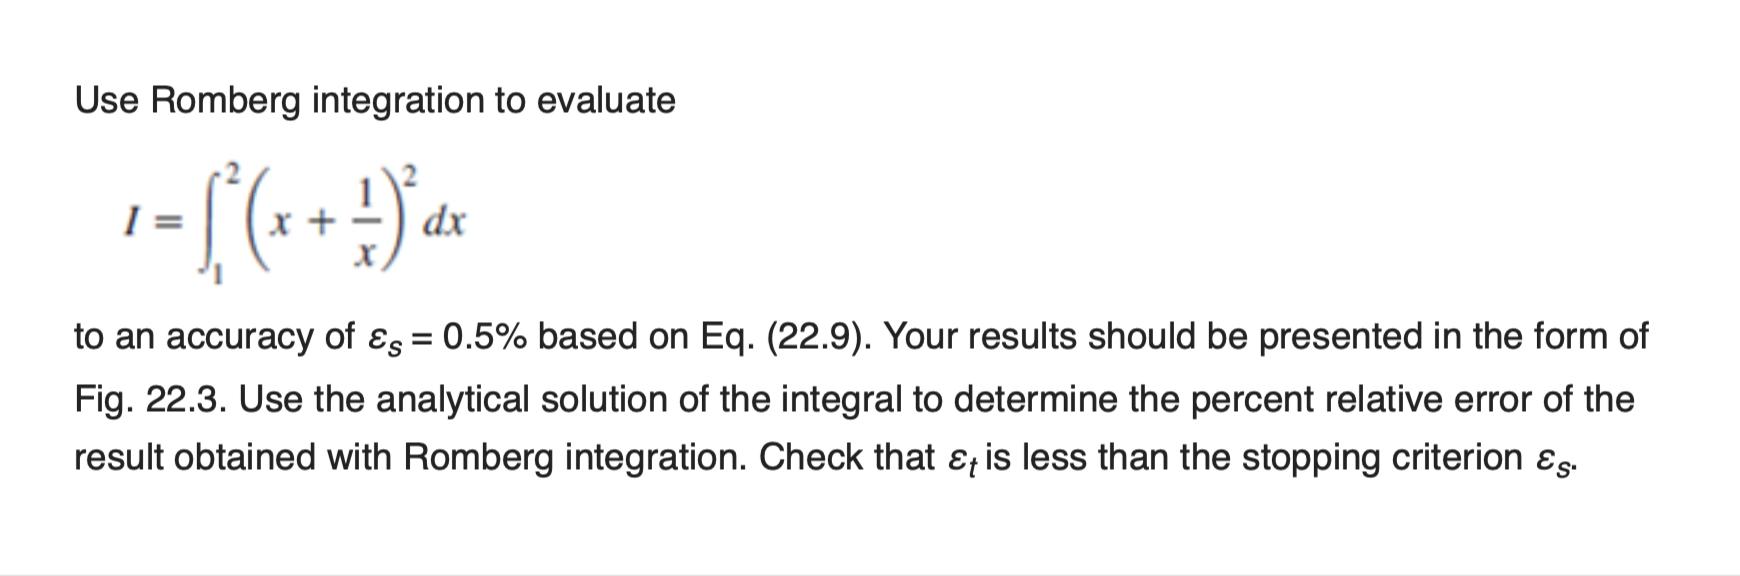 Use Romberg integration to evaluate to an accuracy of Es = 0.5% based on Eq. (22.9). Your results should be presented in the